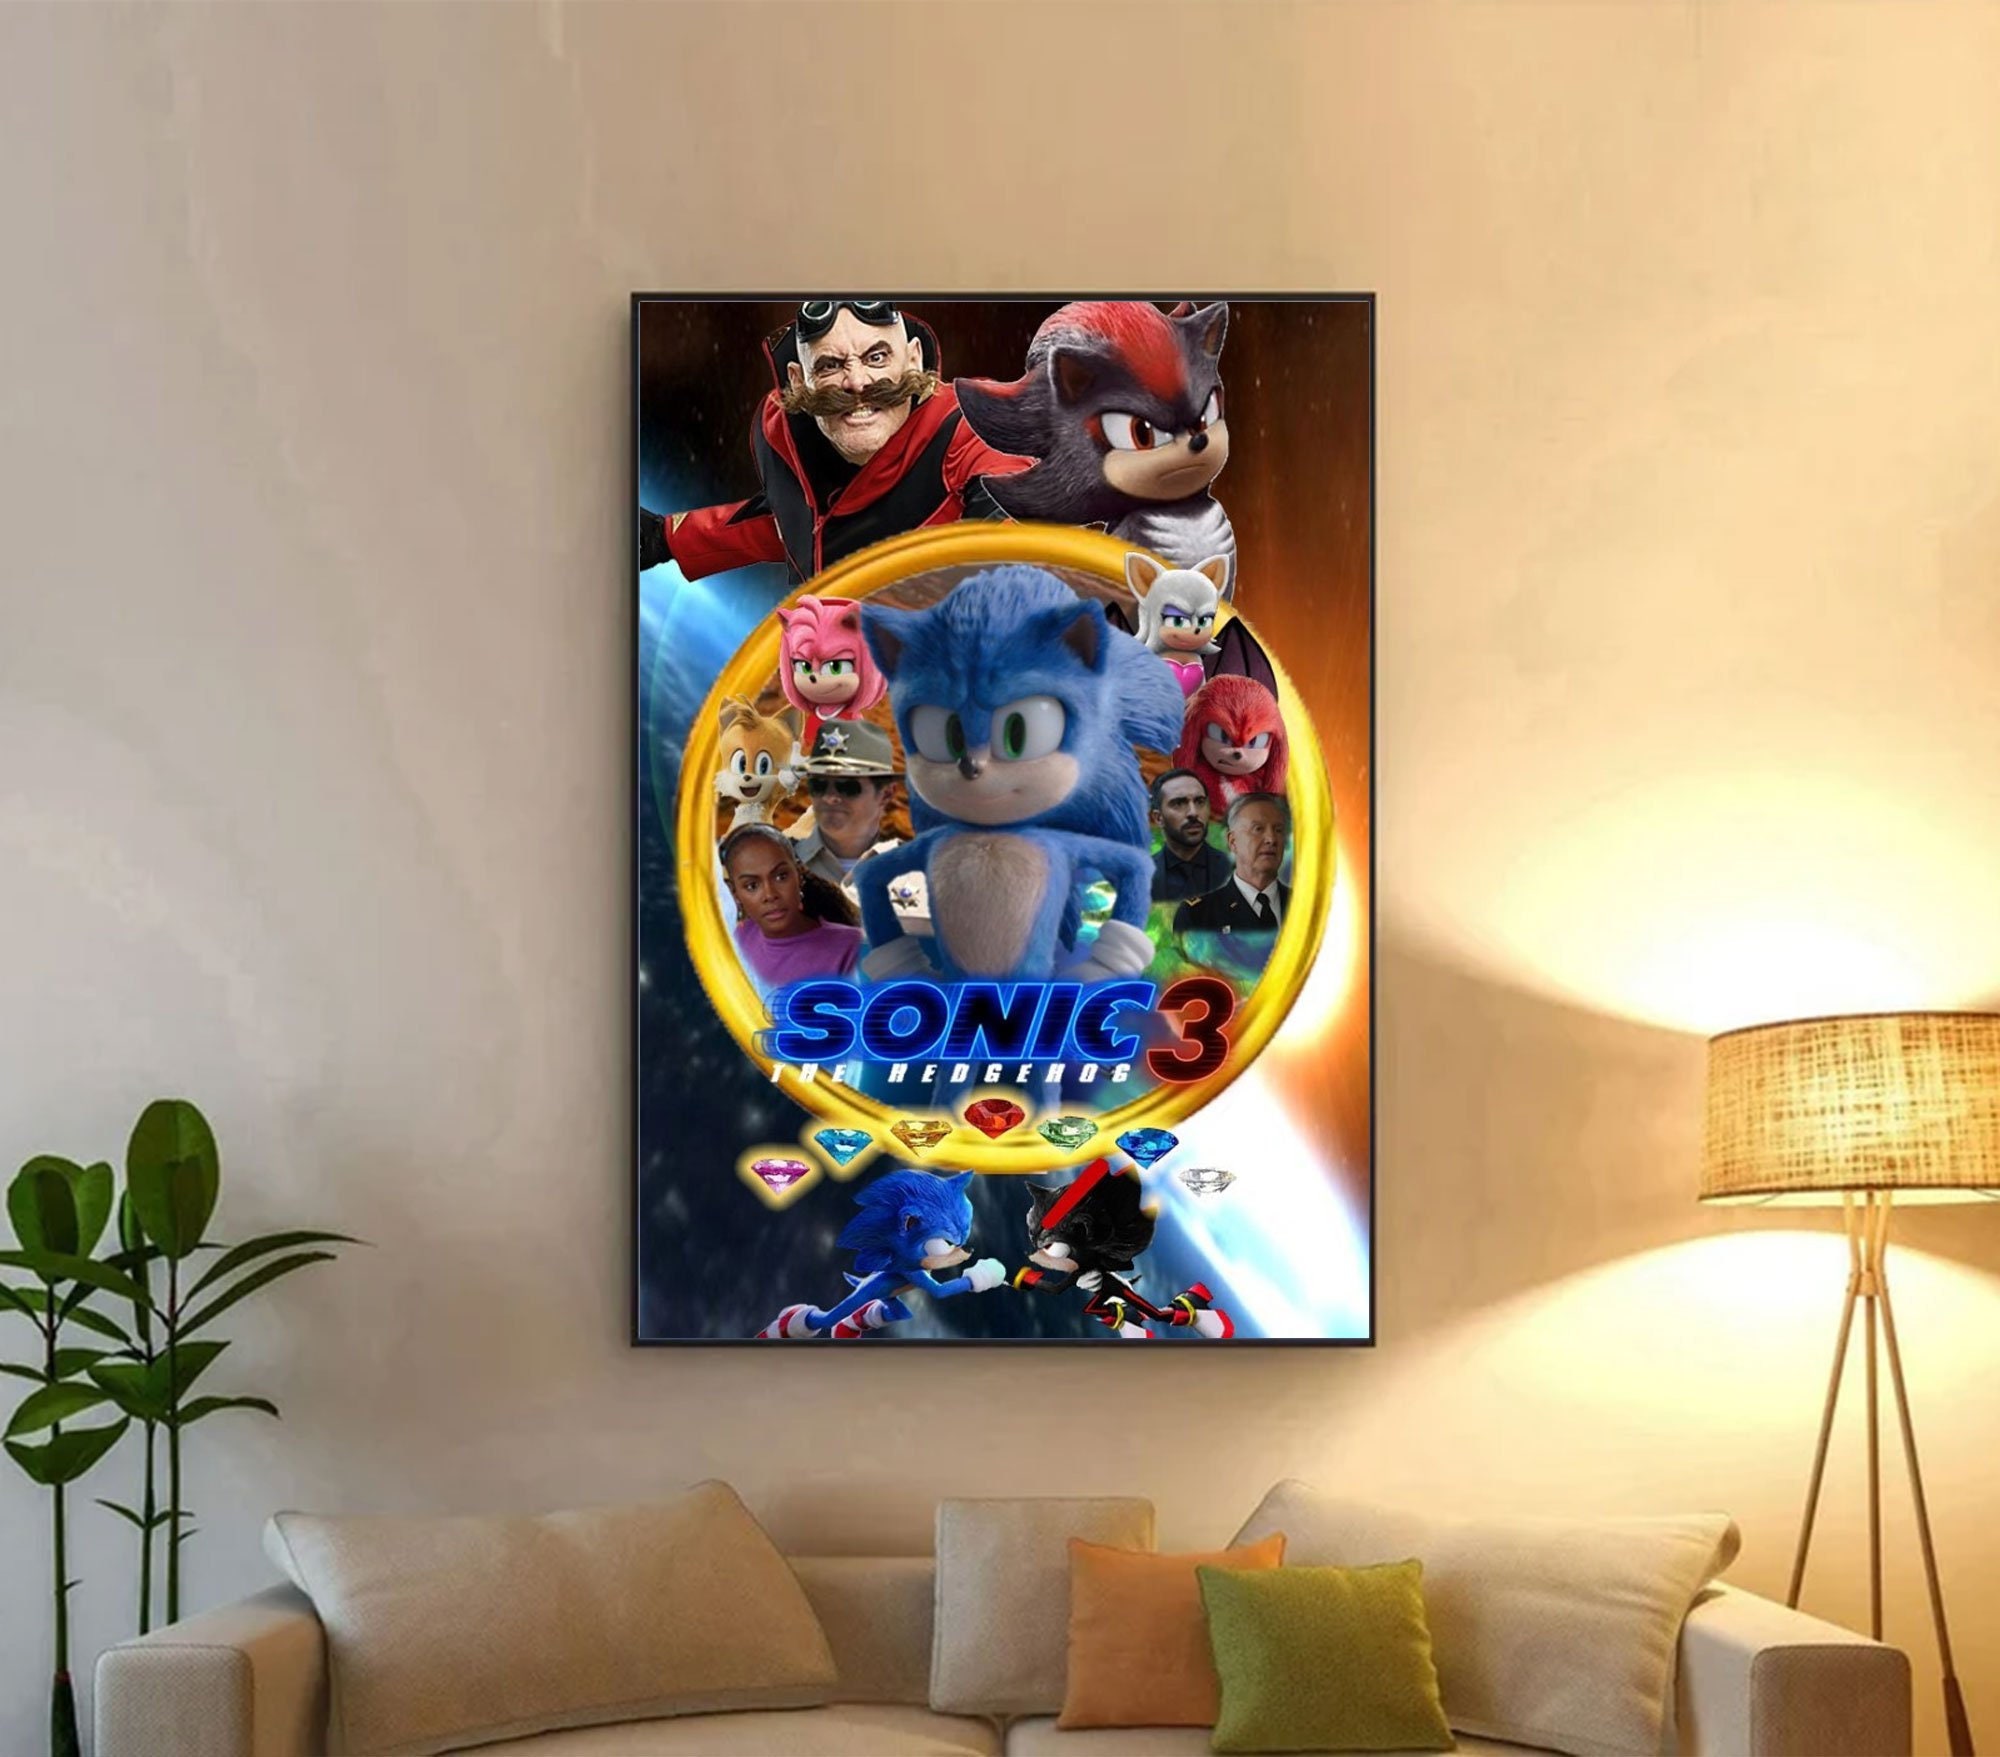 Sonic The Hedgehog 3 Poster sold by Geoff White, SKU 24536693